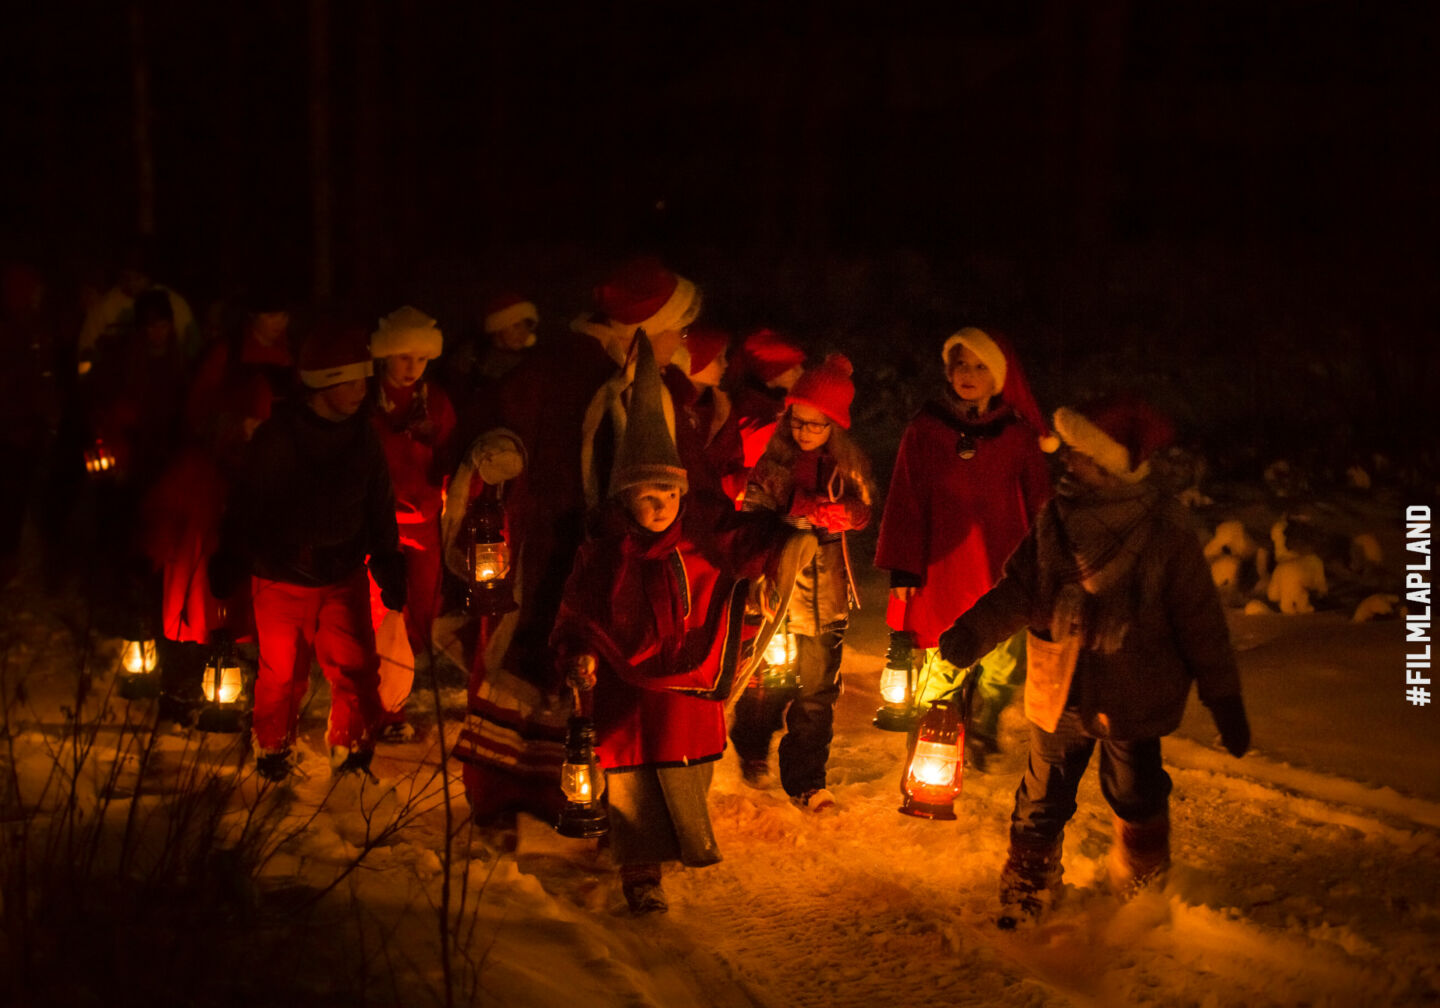 Christmas and Santa Claus, a feature of filming locations in Finnish Lapland